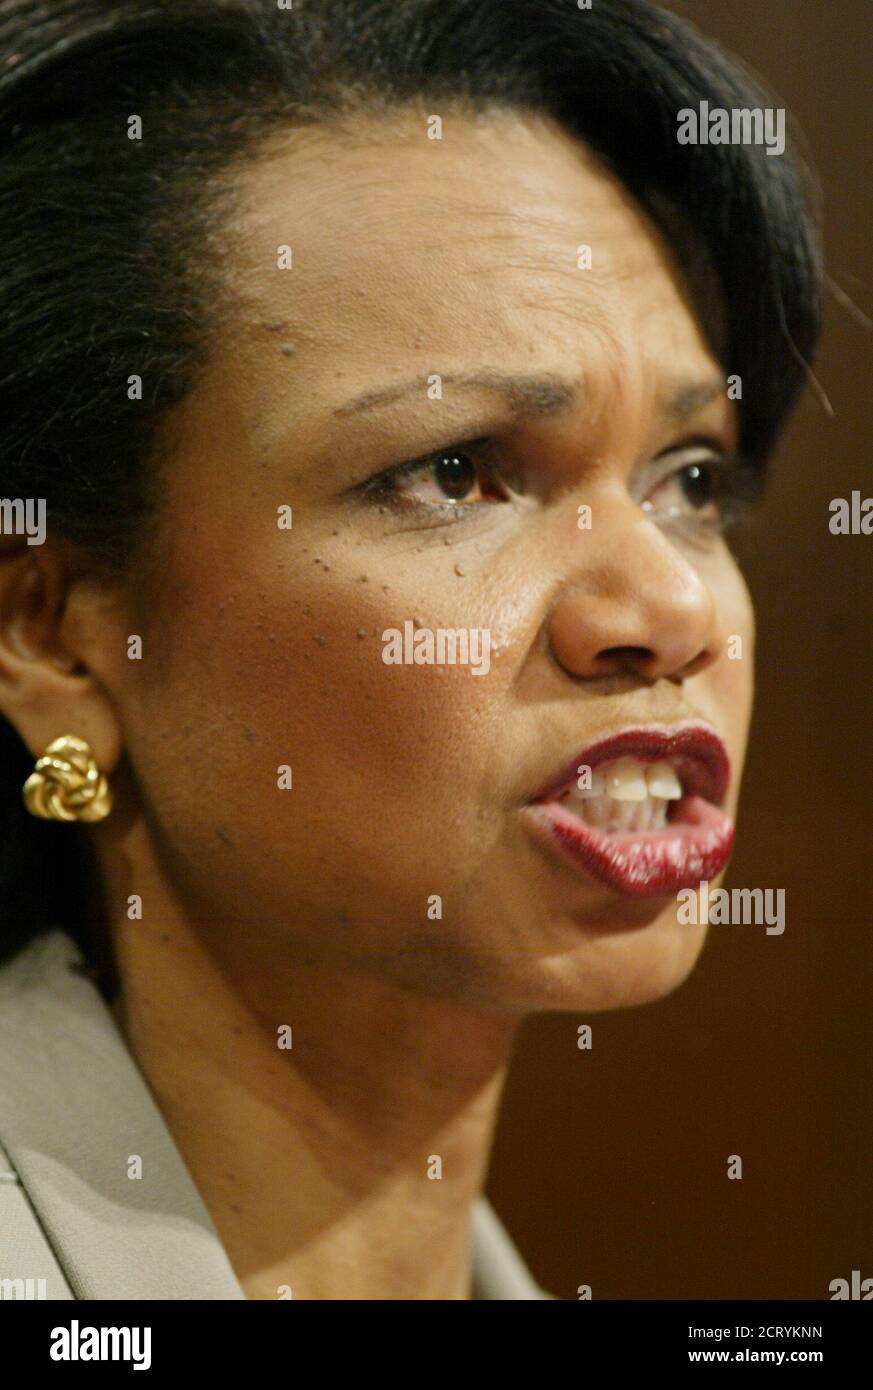 U.S. National Security Advisor Condoleezza Rice responds to a question during testimony before the 9-11 commission in the Hart Senate office building on Capitol Hill in Washington April 8, 2004. Rice on Thursday told the commission investigating the Sept. 11 attacks the U.S. government's response to the terrorism threat was insufficient across several administrations. REUTERS/Jim Bourg  MR Stock Photo